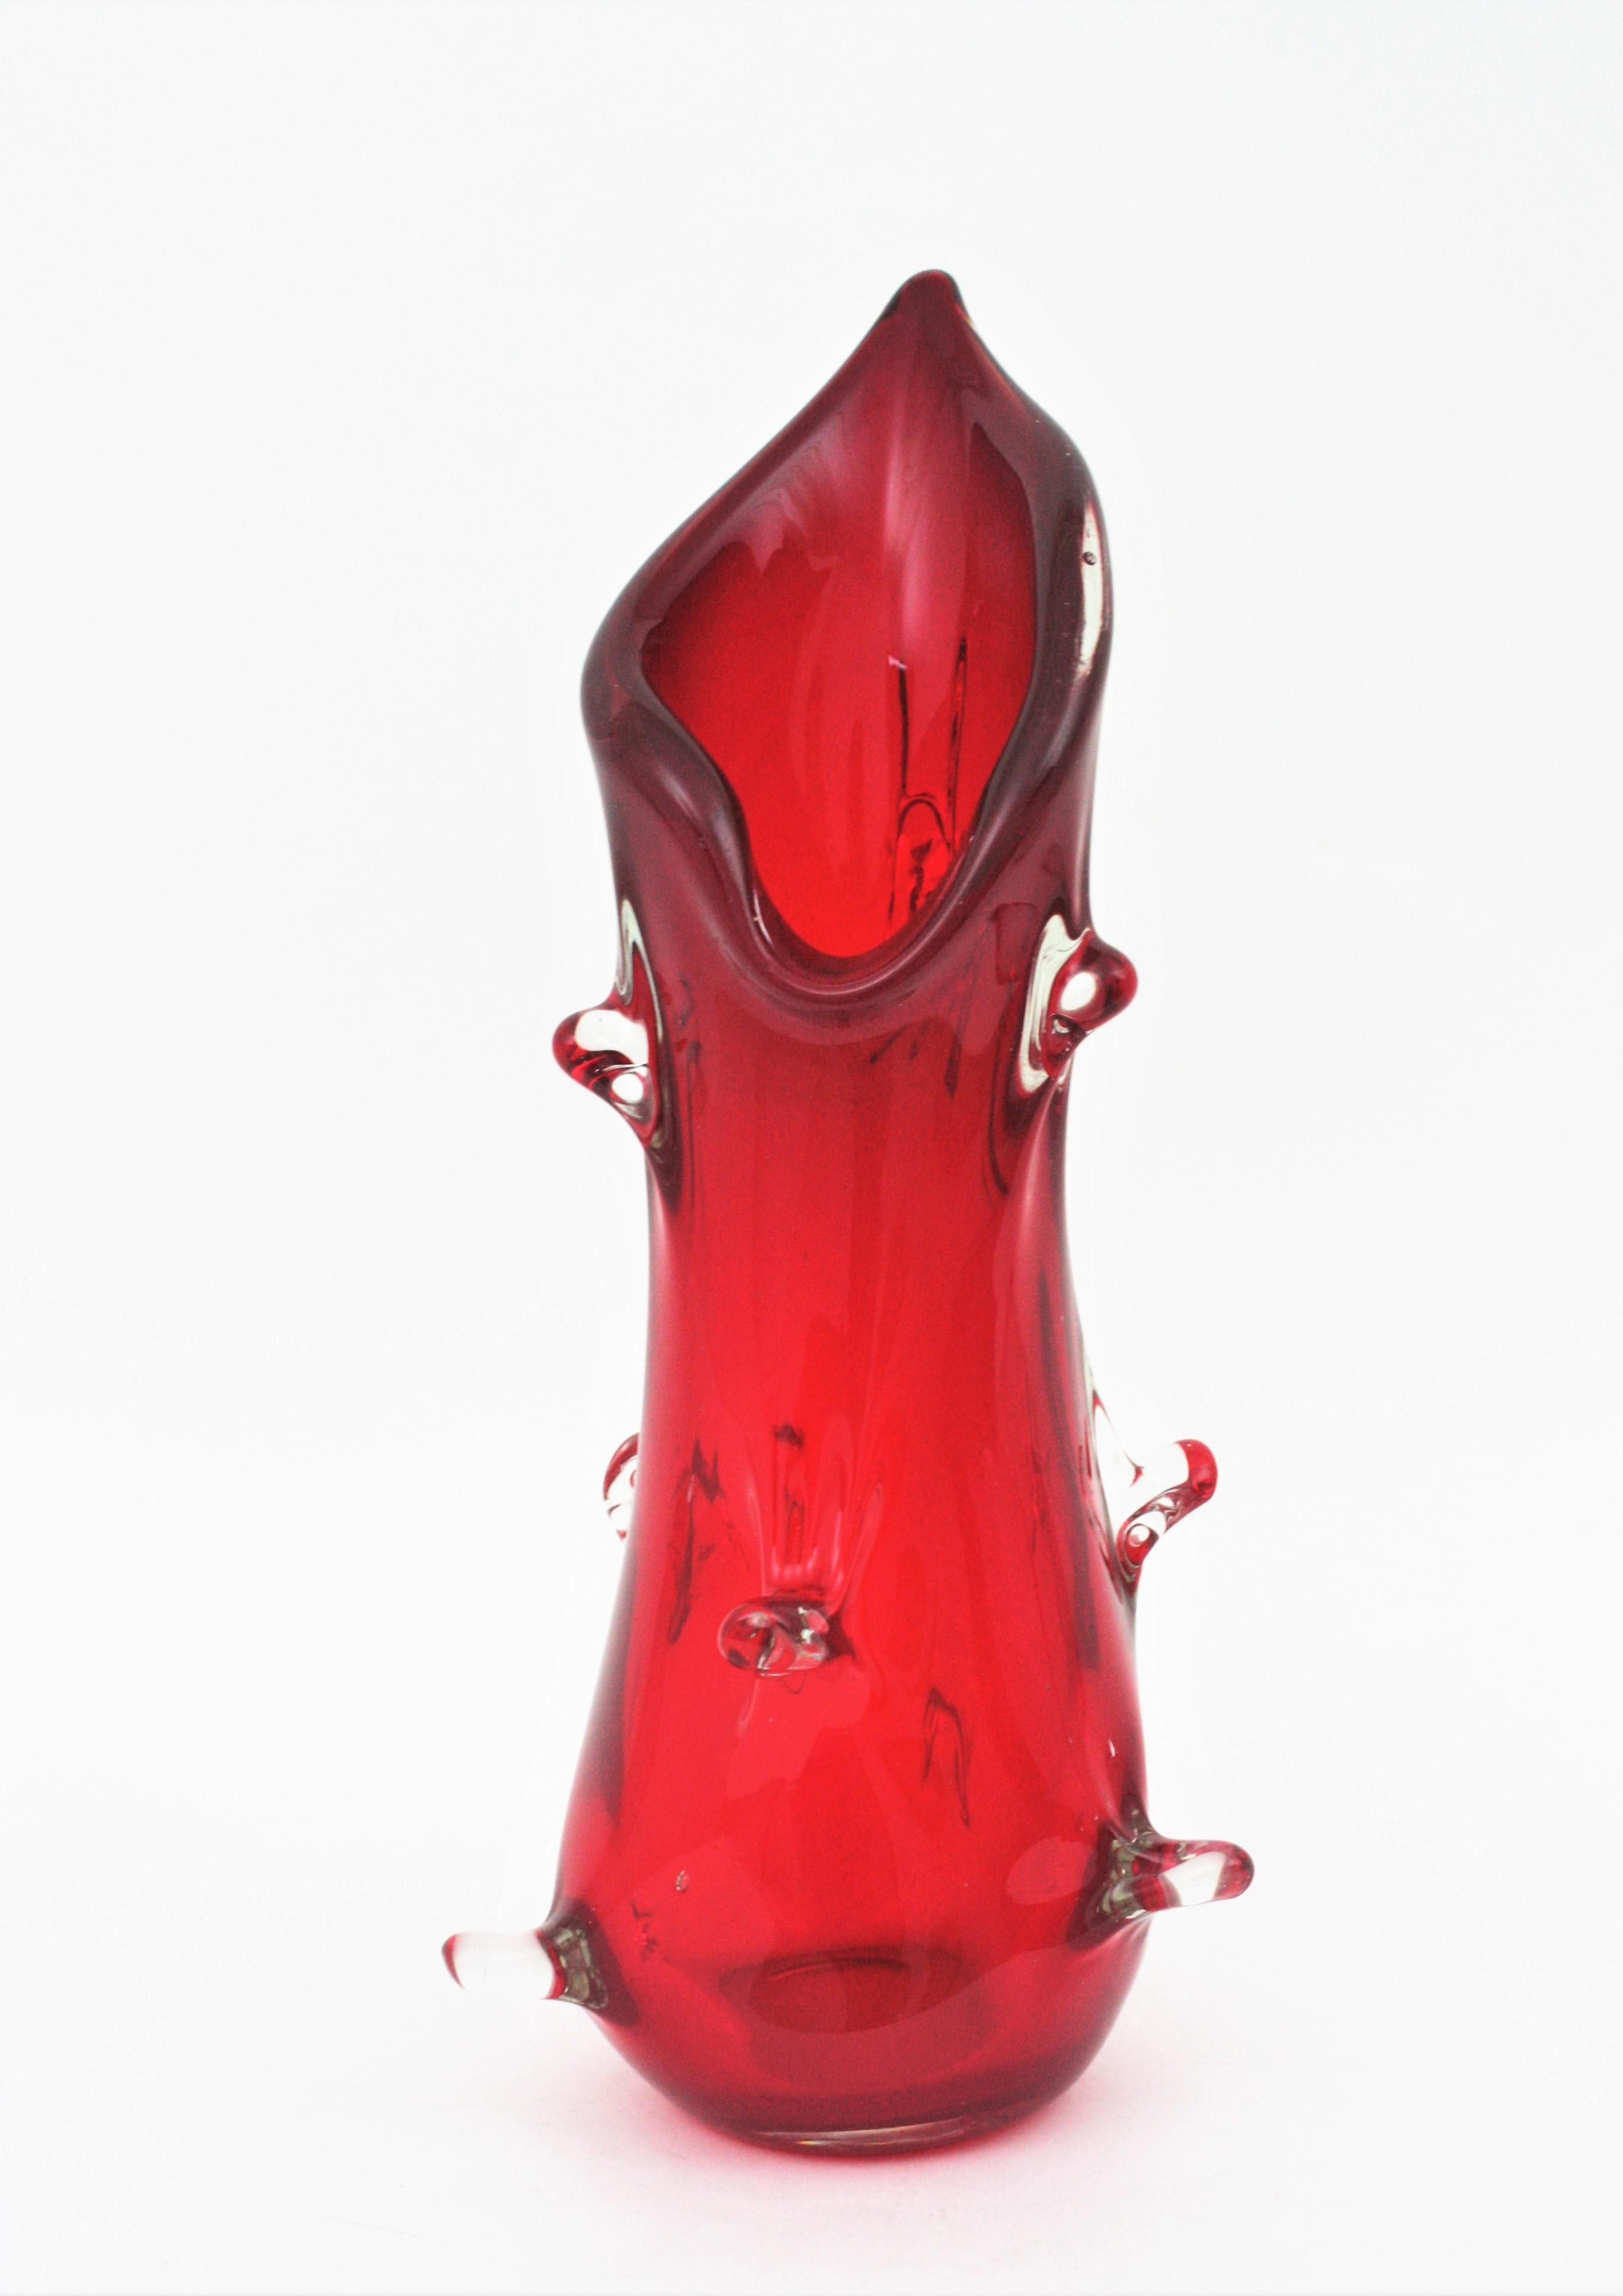 20th Century Archimede Seguso Murano Sommerso Red Iridiscent Art Glass Vase, 1960s For Sale